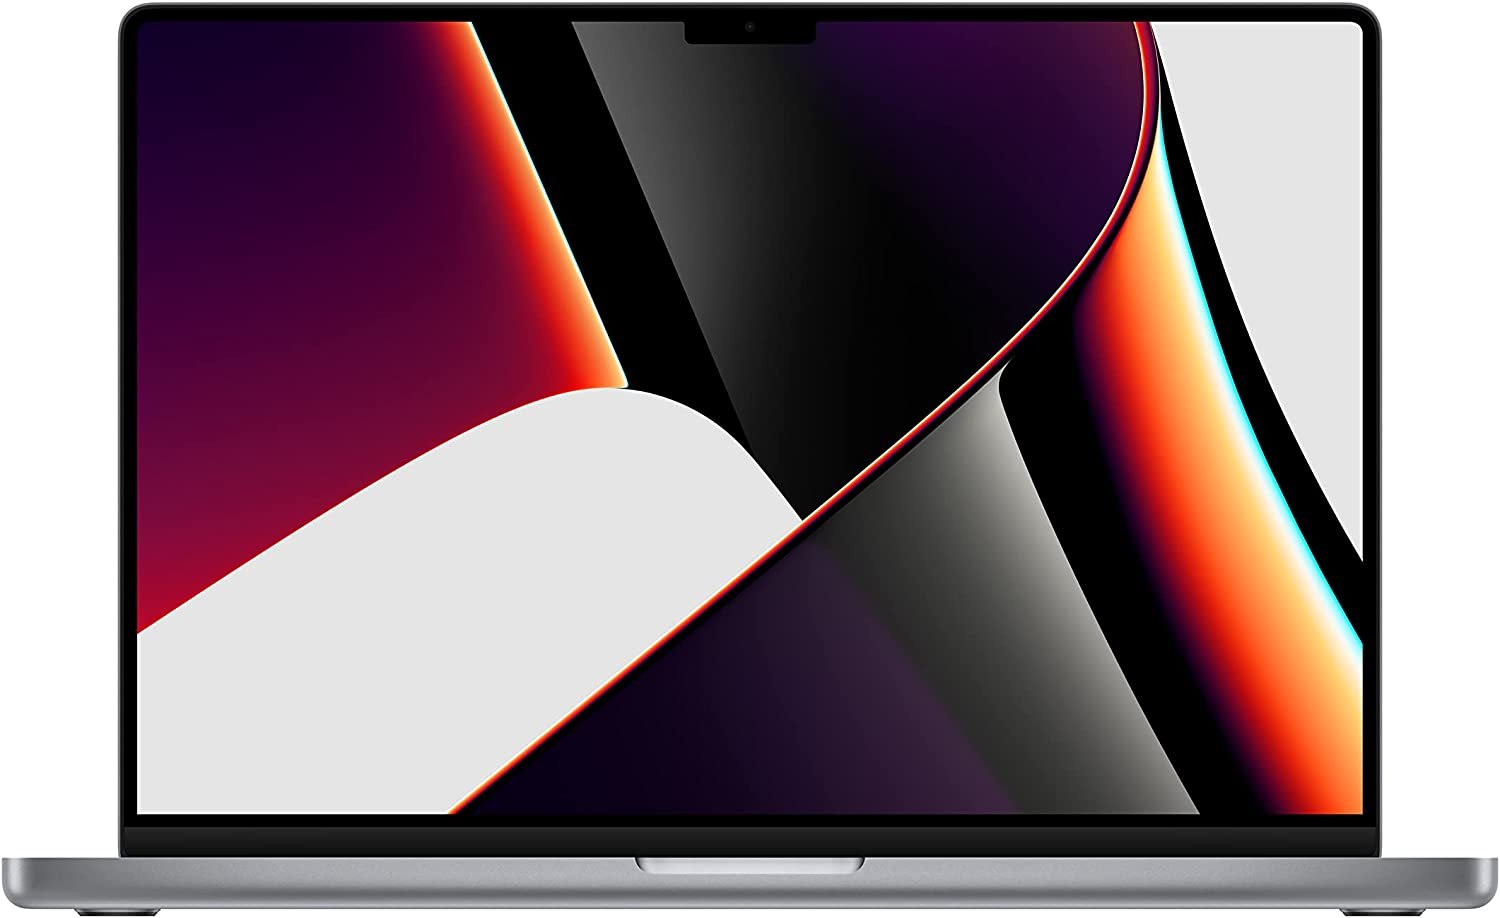 Apple 2021 MacBook Pro (16-inch, M1 Max chip with 10‑core CPU and 32‑core GPU, 32GB RAM, 1TB SSD) - Space Gray